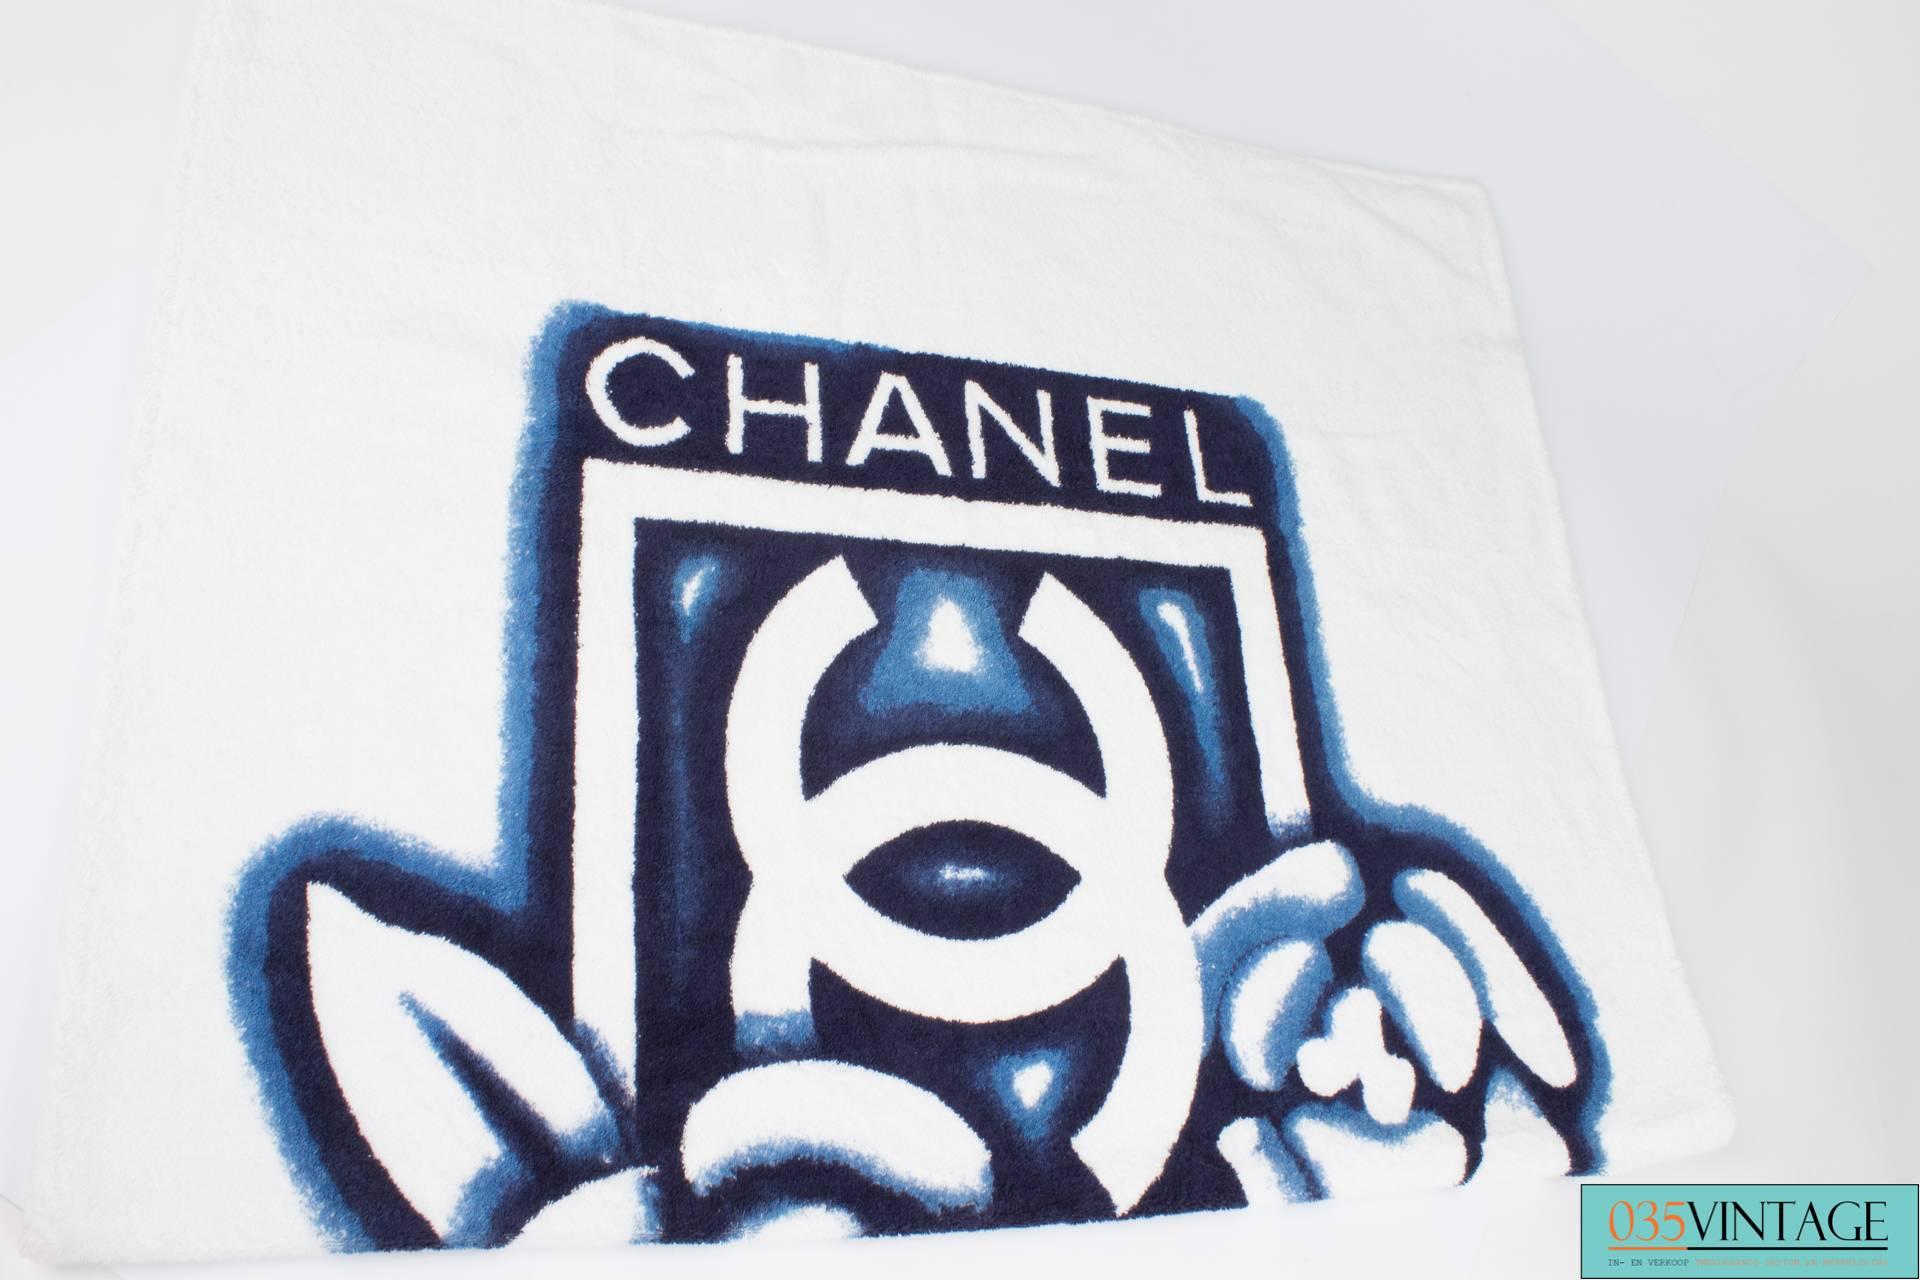 

Large square beach bag by Chanel made of dark blue terry cloth, white interlocking CC's on the front and back.

This bag has two handles that measure 36 centimeters each. On the inside lined with smooth dark blue fabric. In between the exterior